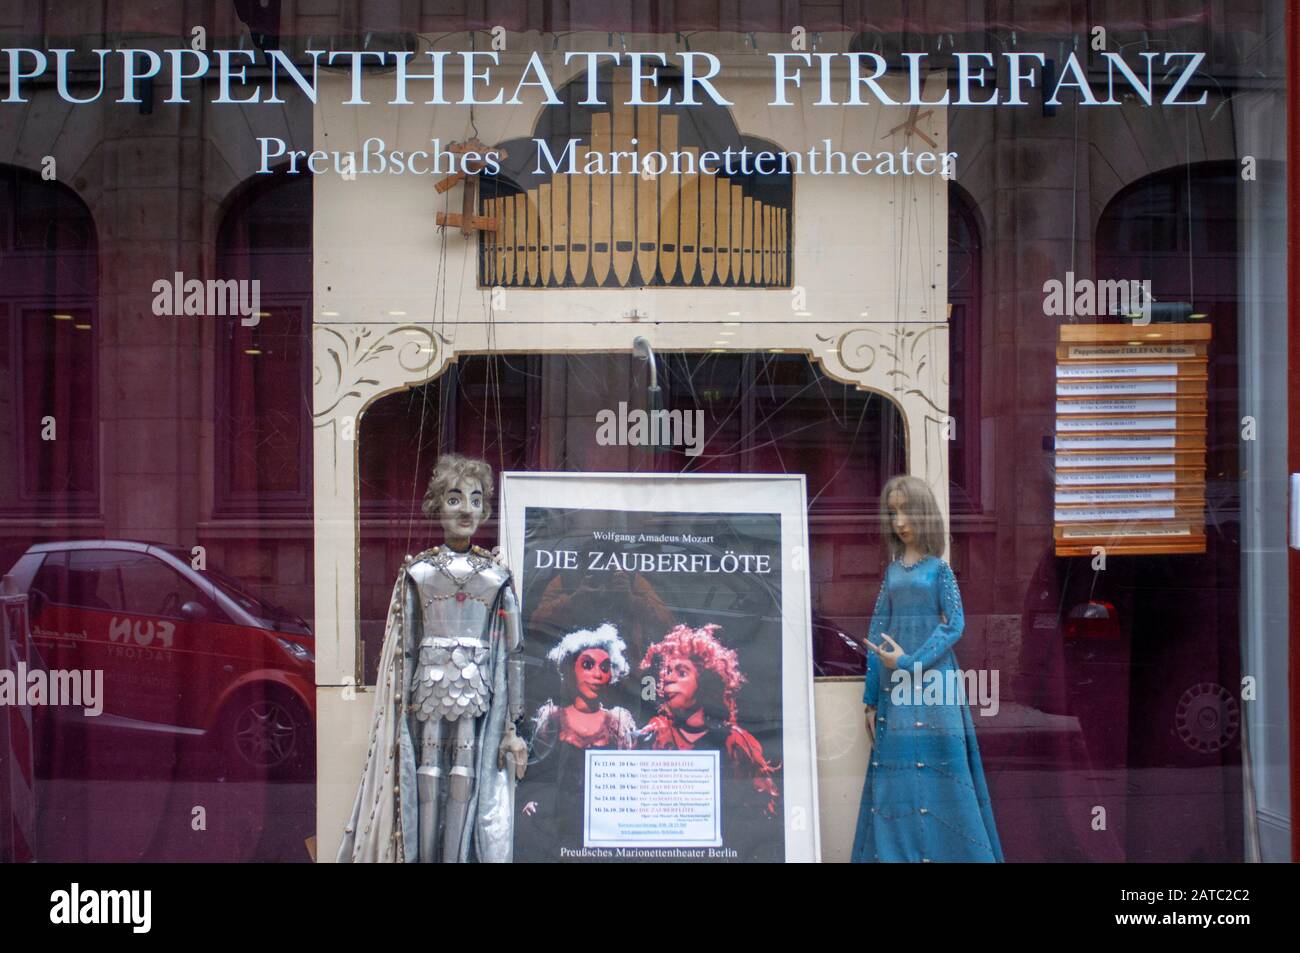 Puppentheater Firlefanz, Preußsches Marionettentheate. Puppet theatre with shows for adults & children using hand made puppets, Mitte Berlin Germany Stock Photo